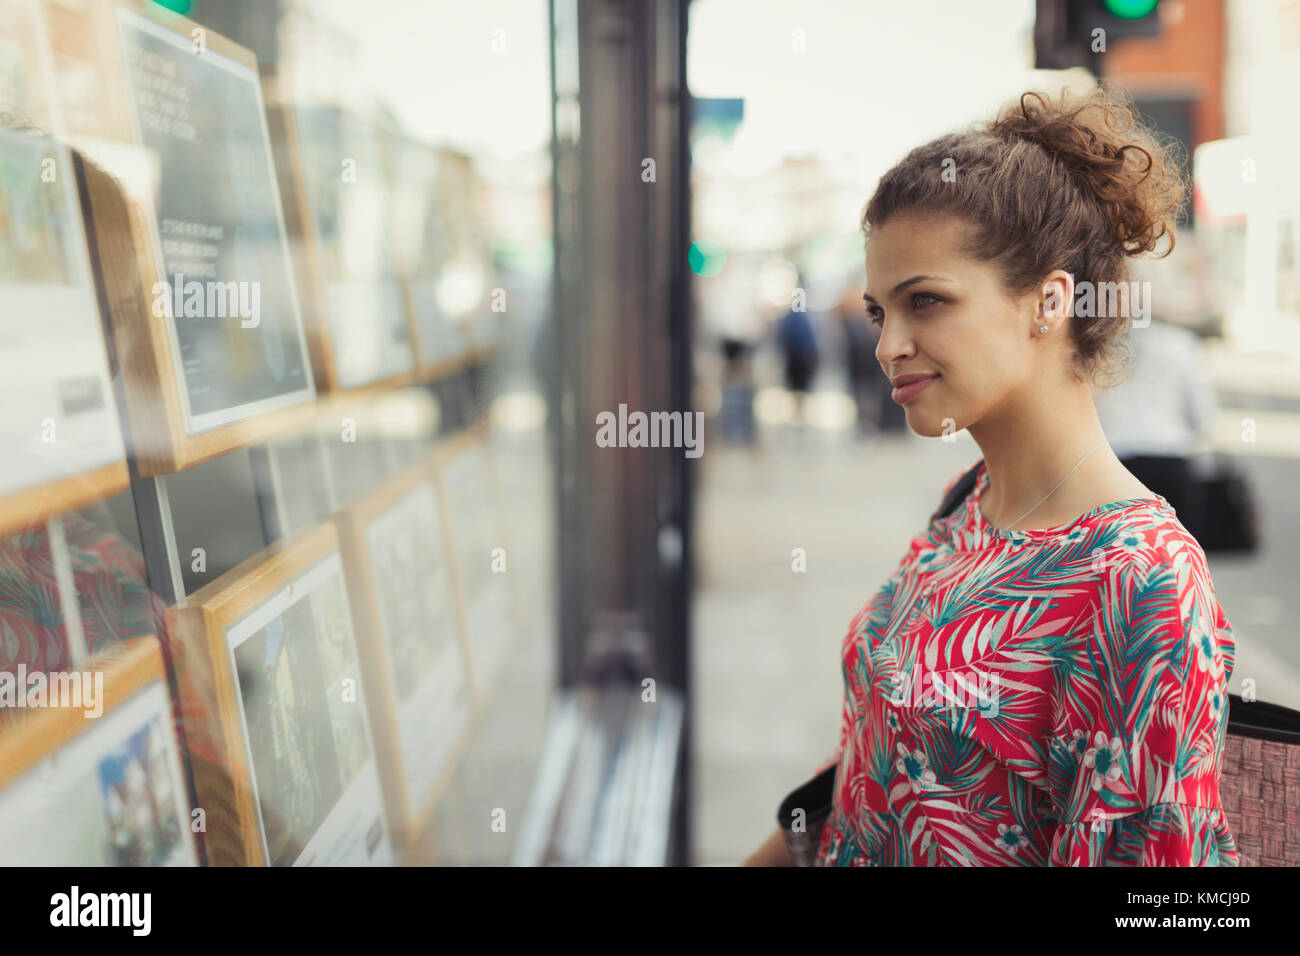 Young woman browsing real estate listings at urban storefront Stock Photo